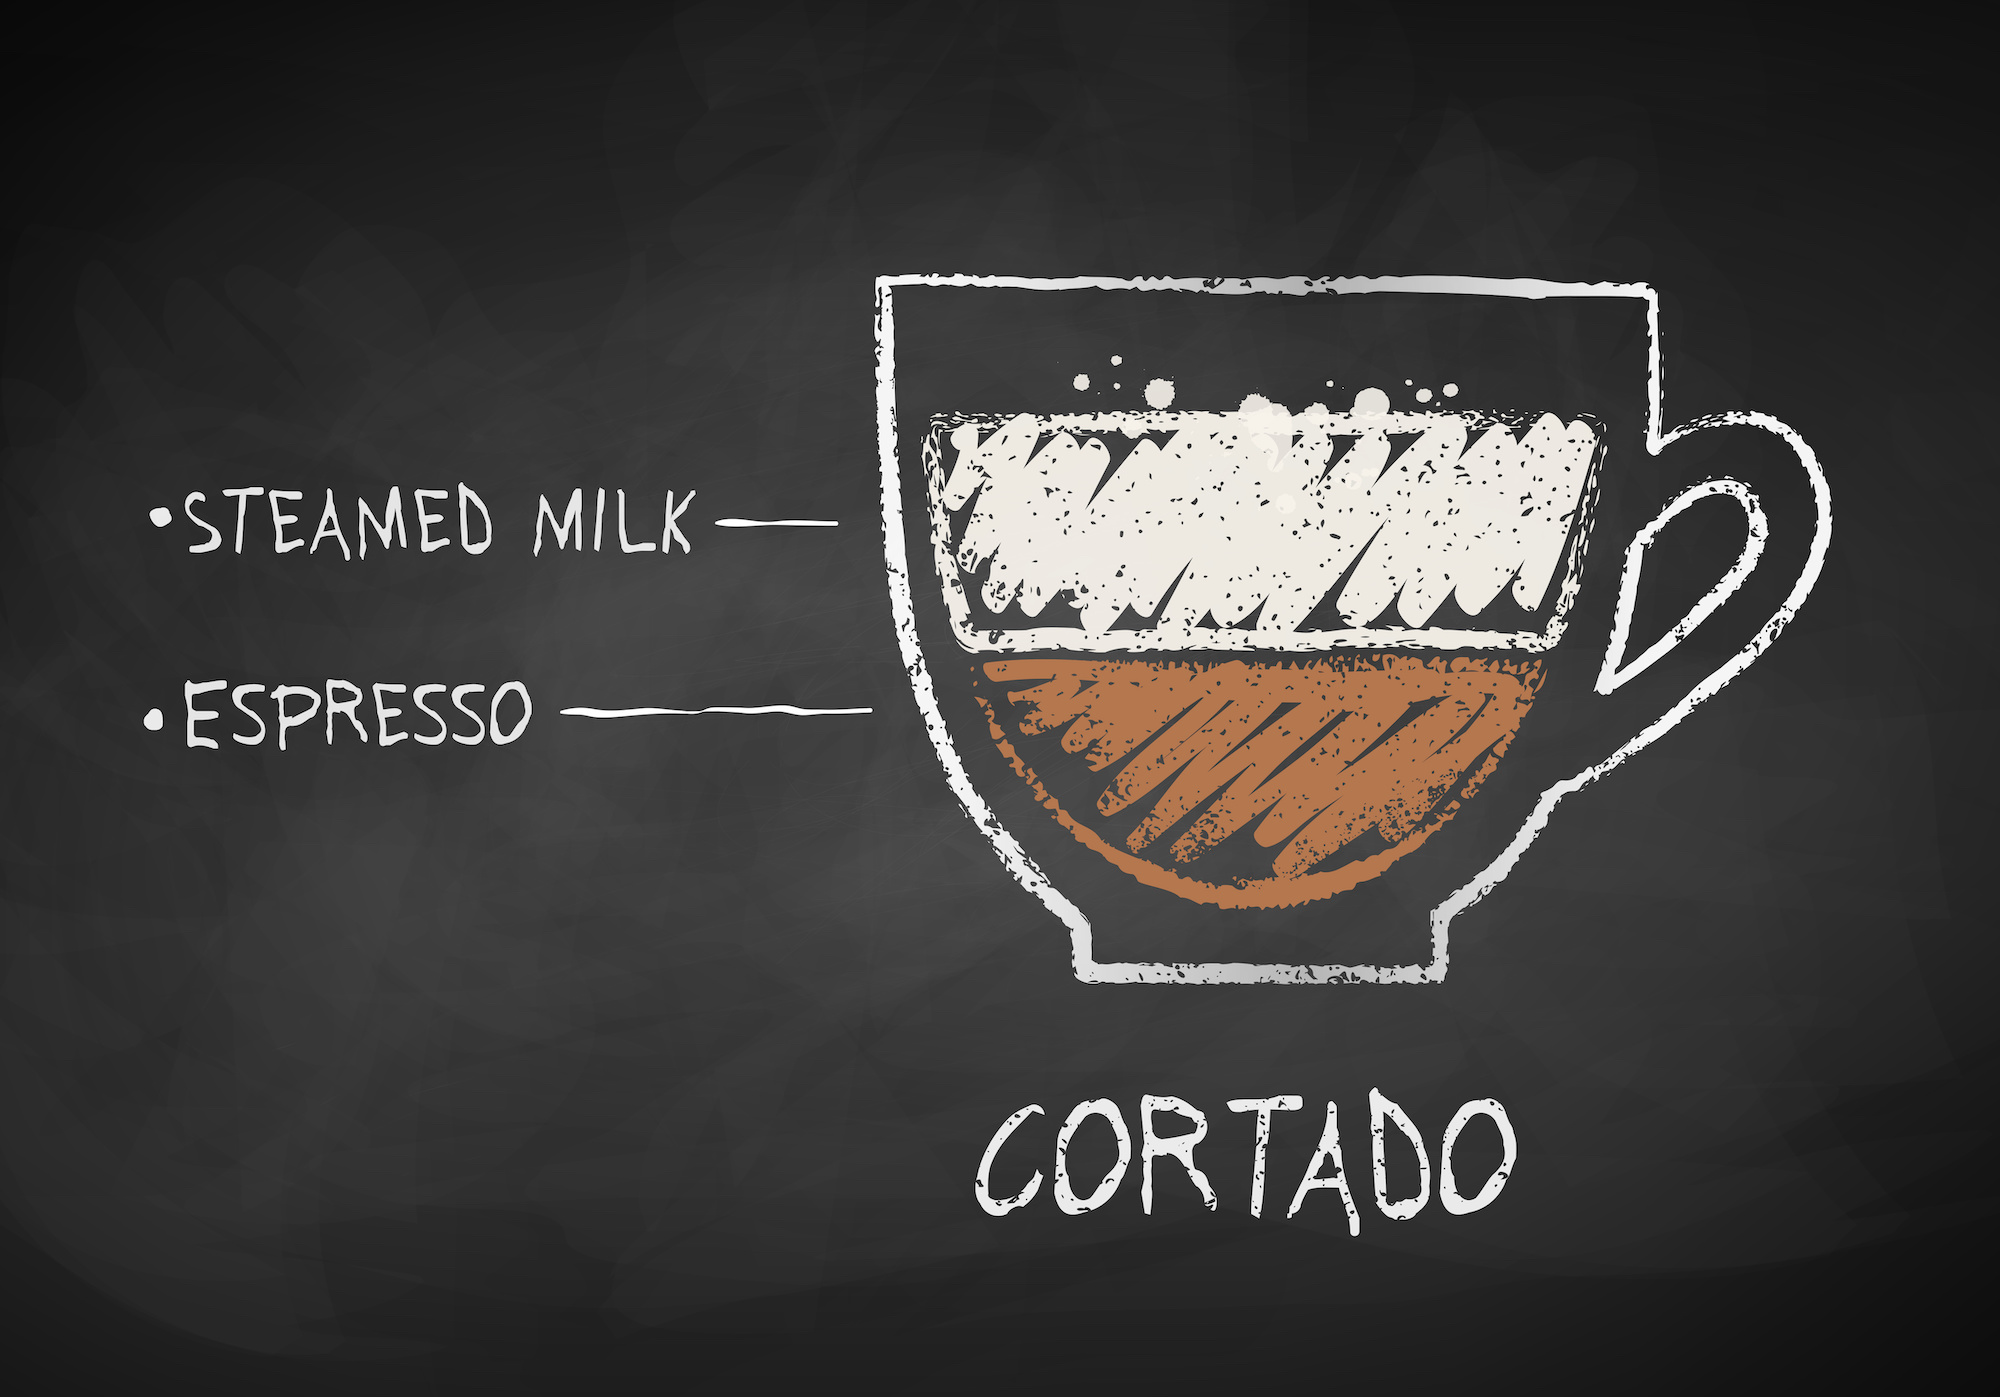 What Is A Cortado?